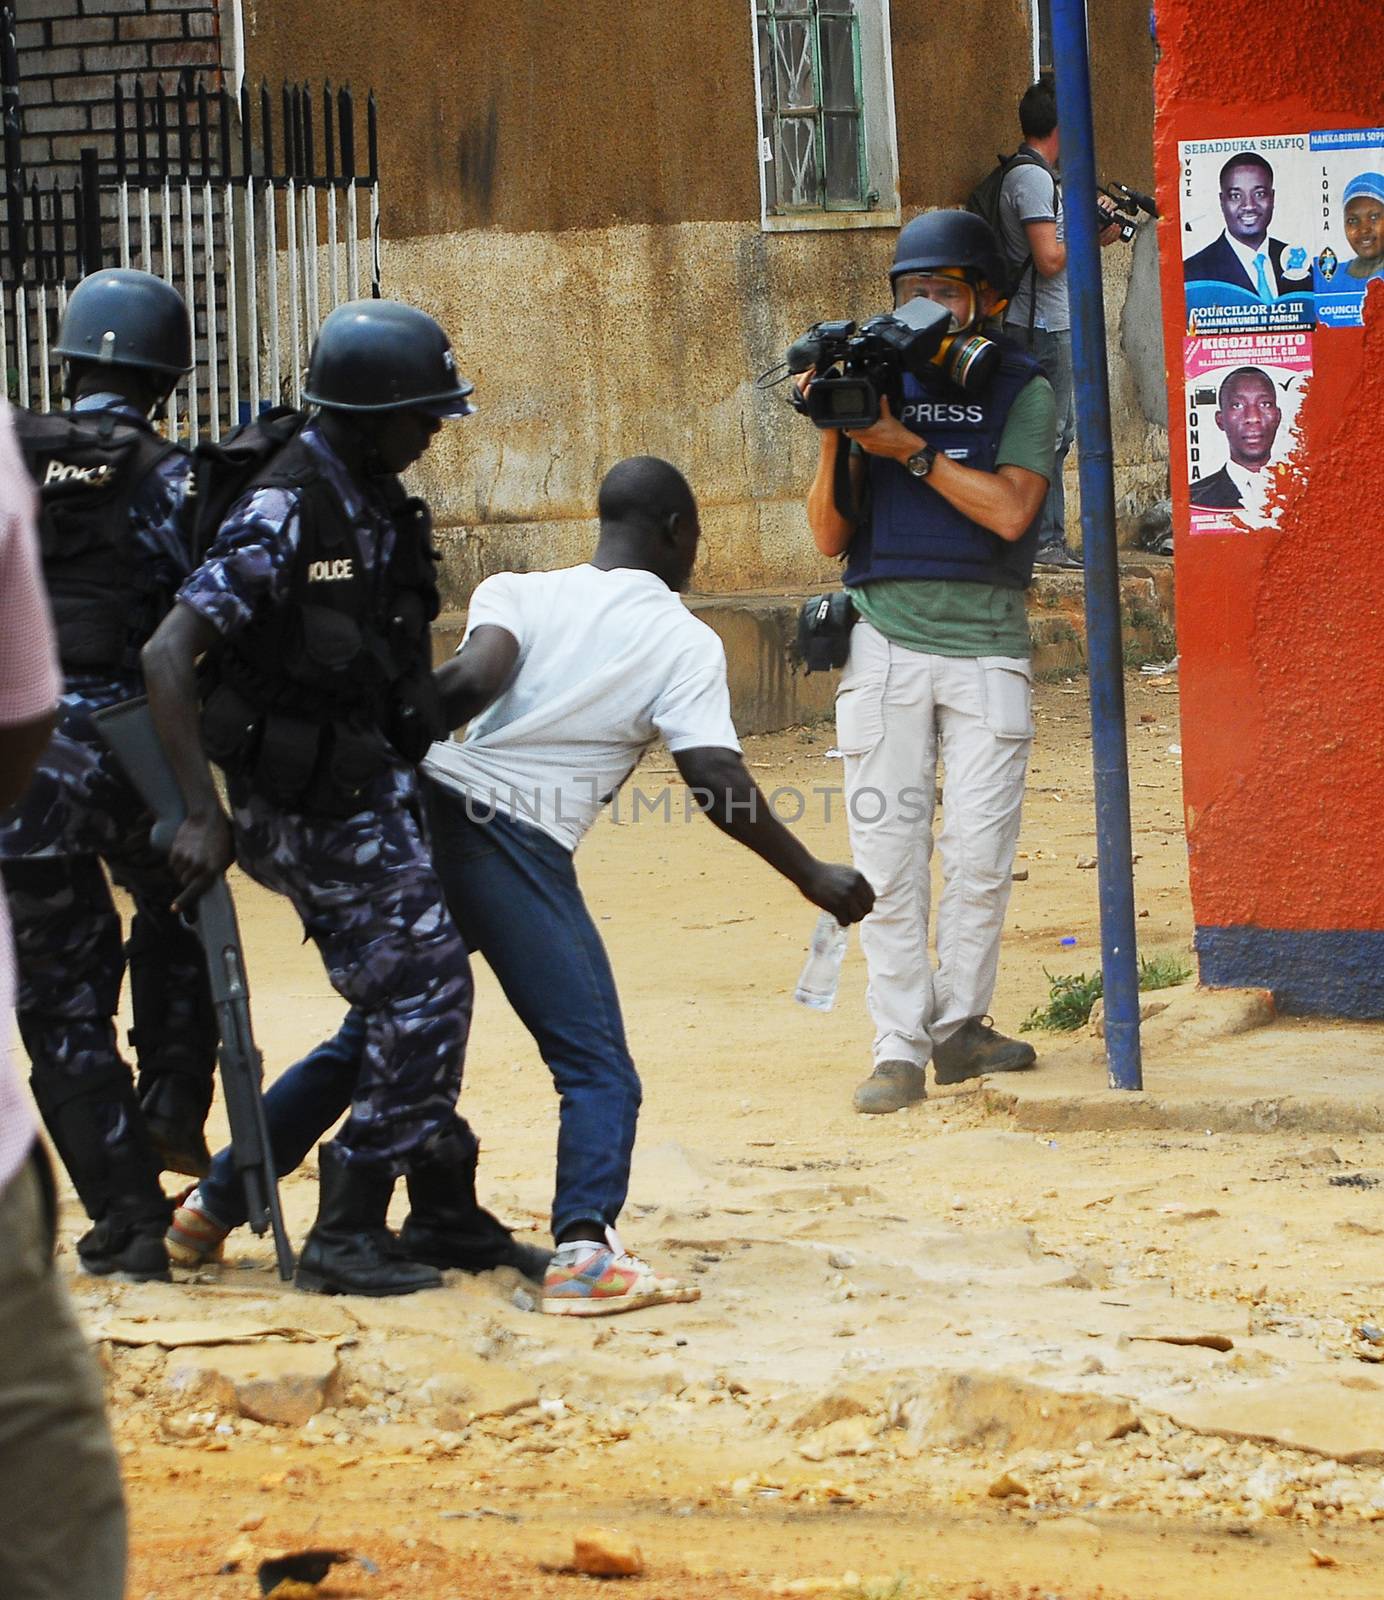 UGANDA, Kampala: Riot police arrest a supporter of presidential candidate Kiiza Besigye at his party headquarters just after Besigye himself was arrested in Kampala, Uganda on February 19, 2016 so as to prevent him from announcing his own results for the day's elections.